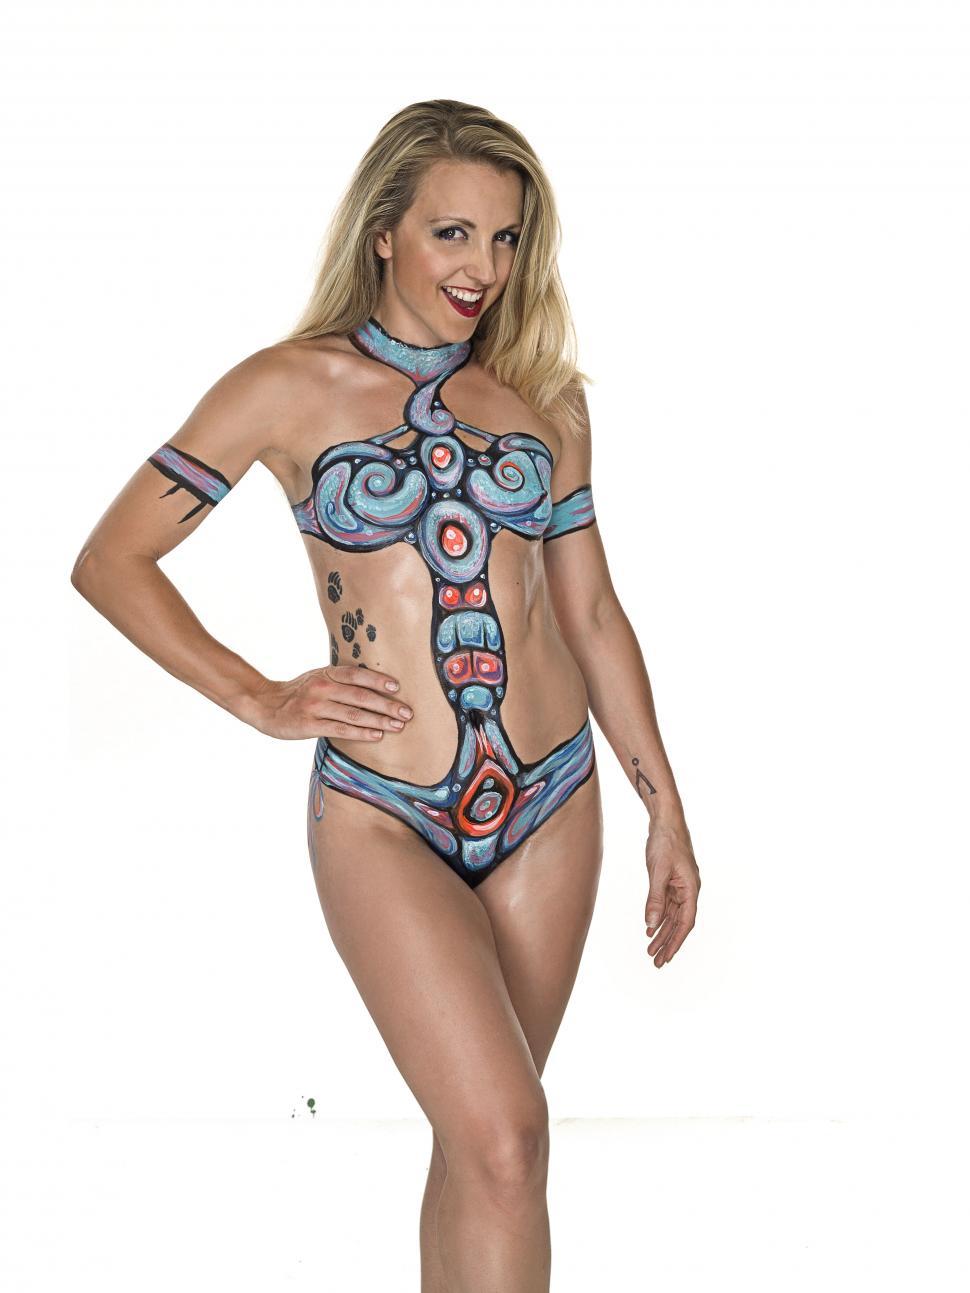 Download Free Stock Photo of Rue in the Body Painted Swimsuit 